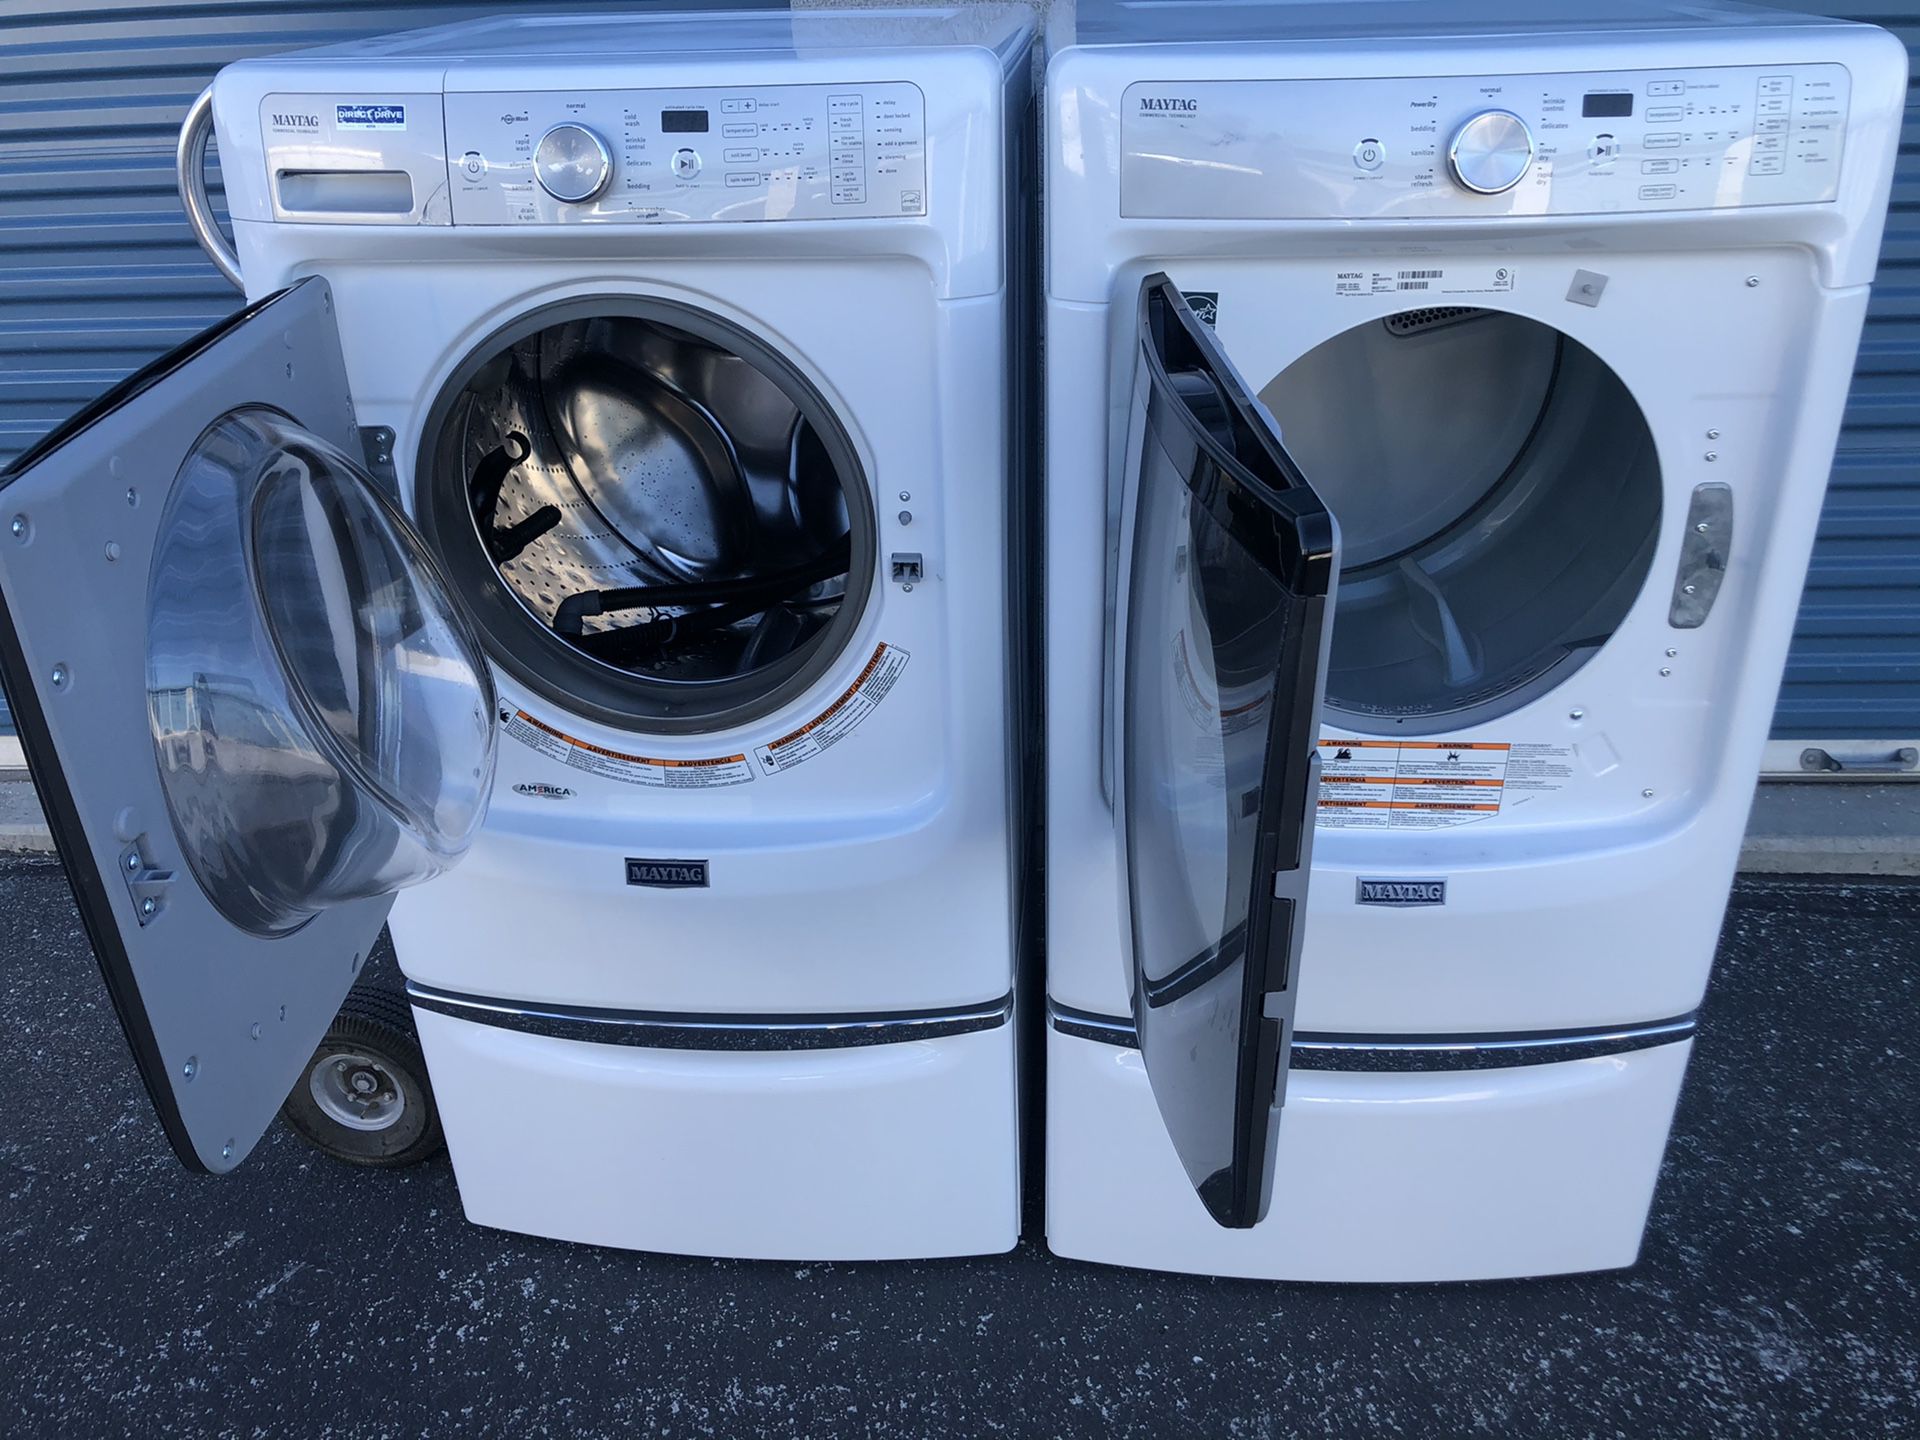 Maytag front load washer and dryer